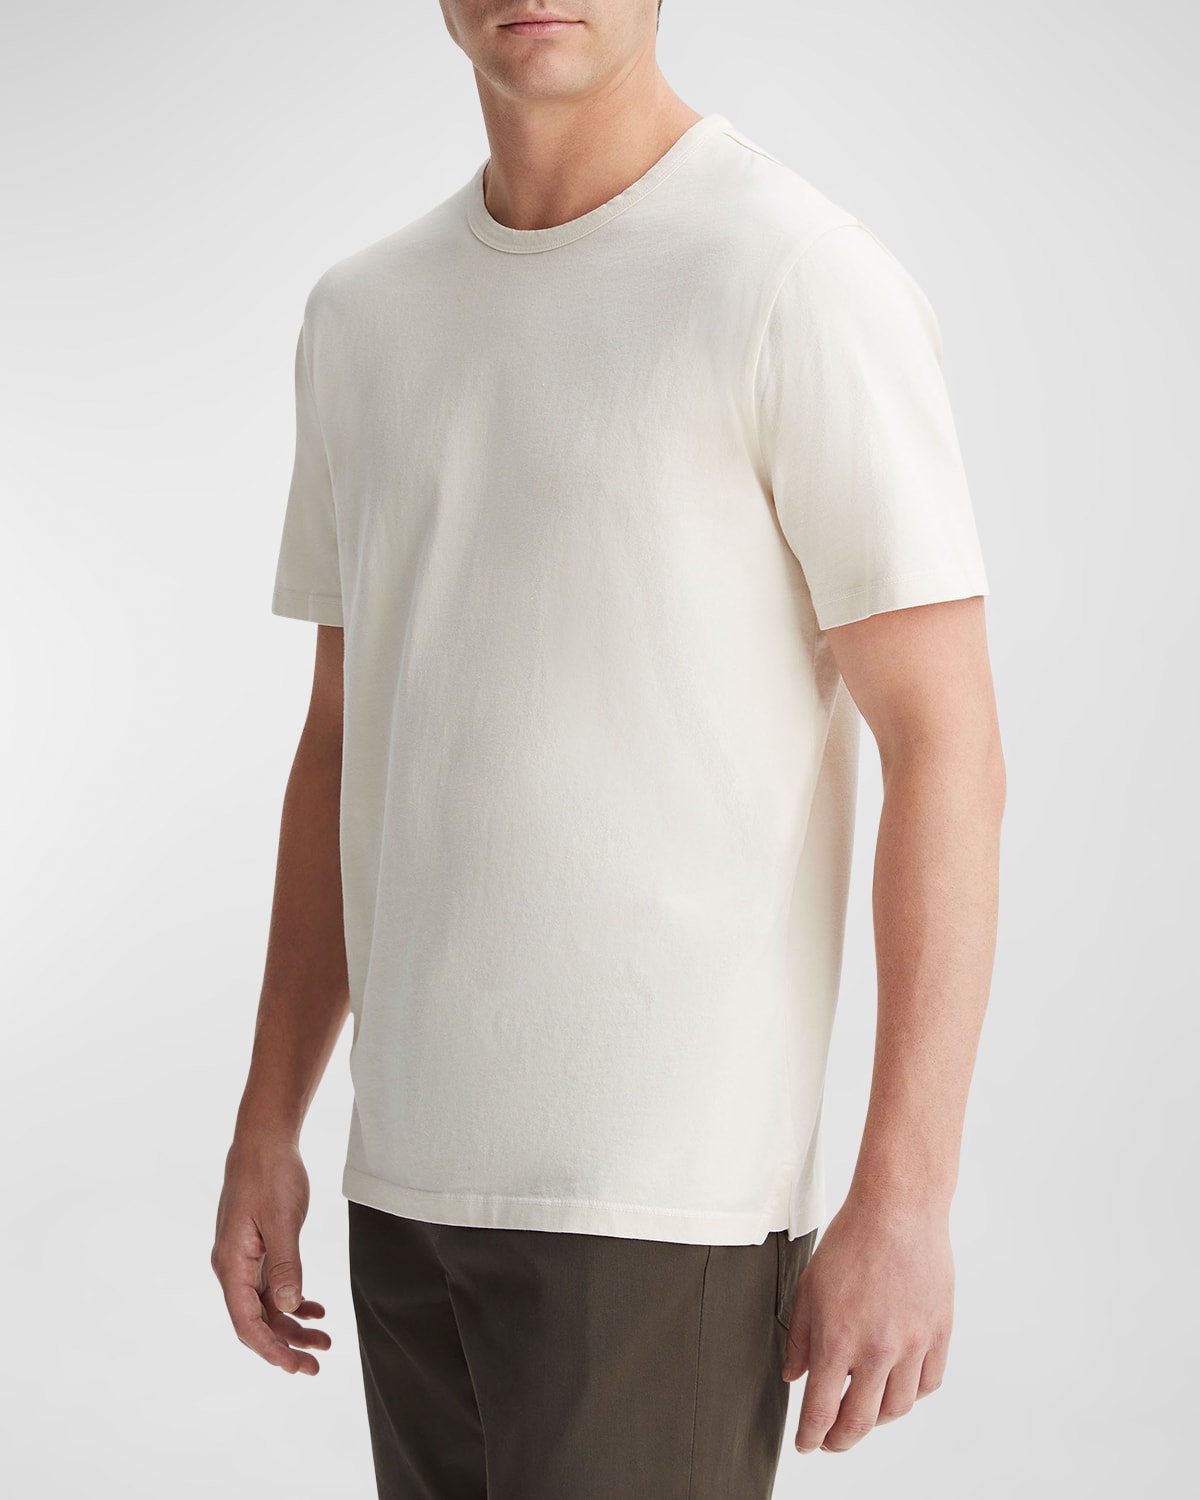 Vince Men's Garment-dyed Crewneck T-shirt In Washed Deco Cream